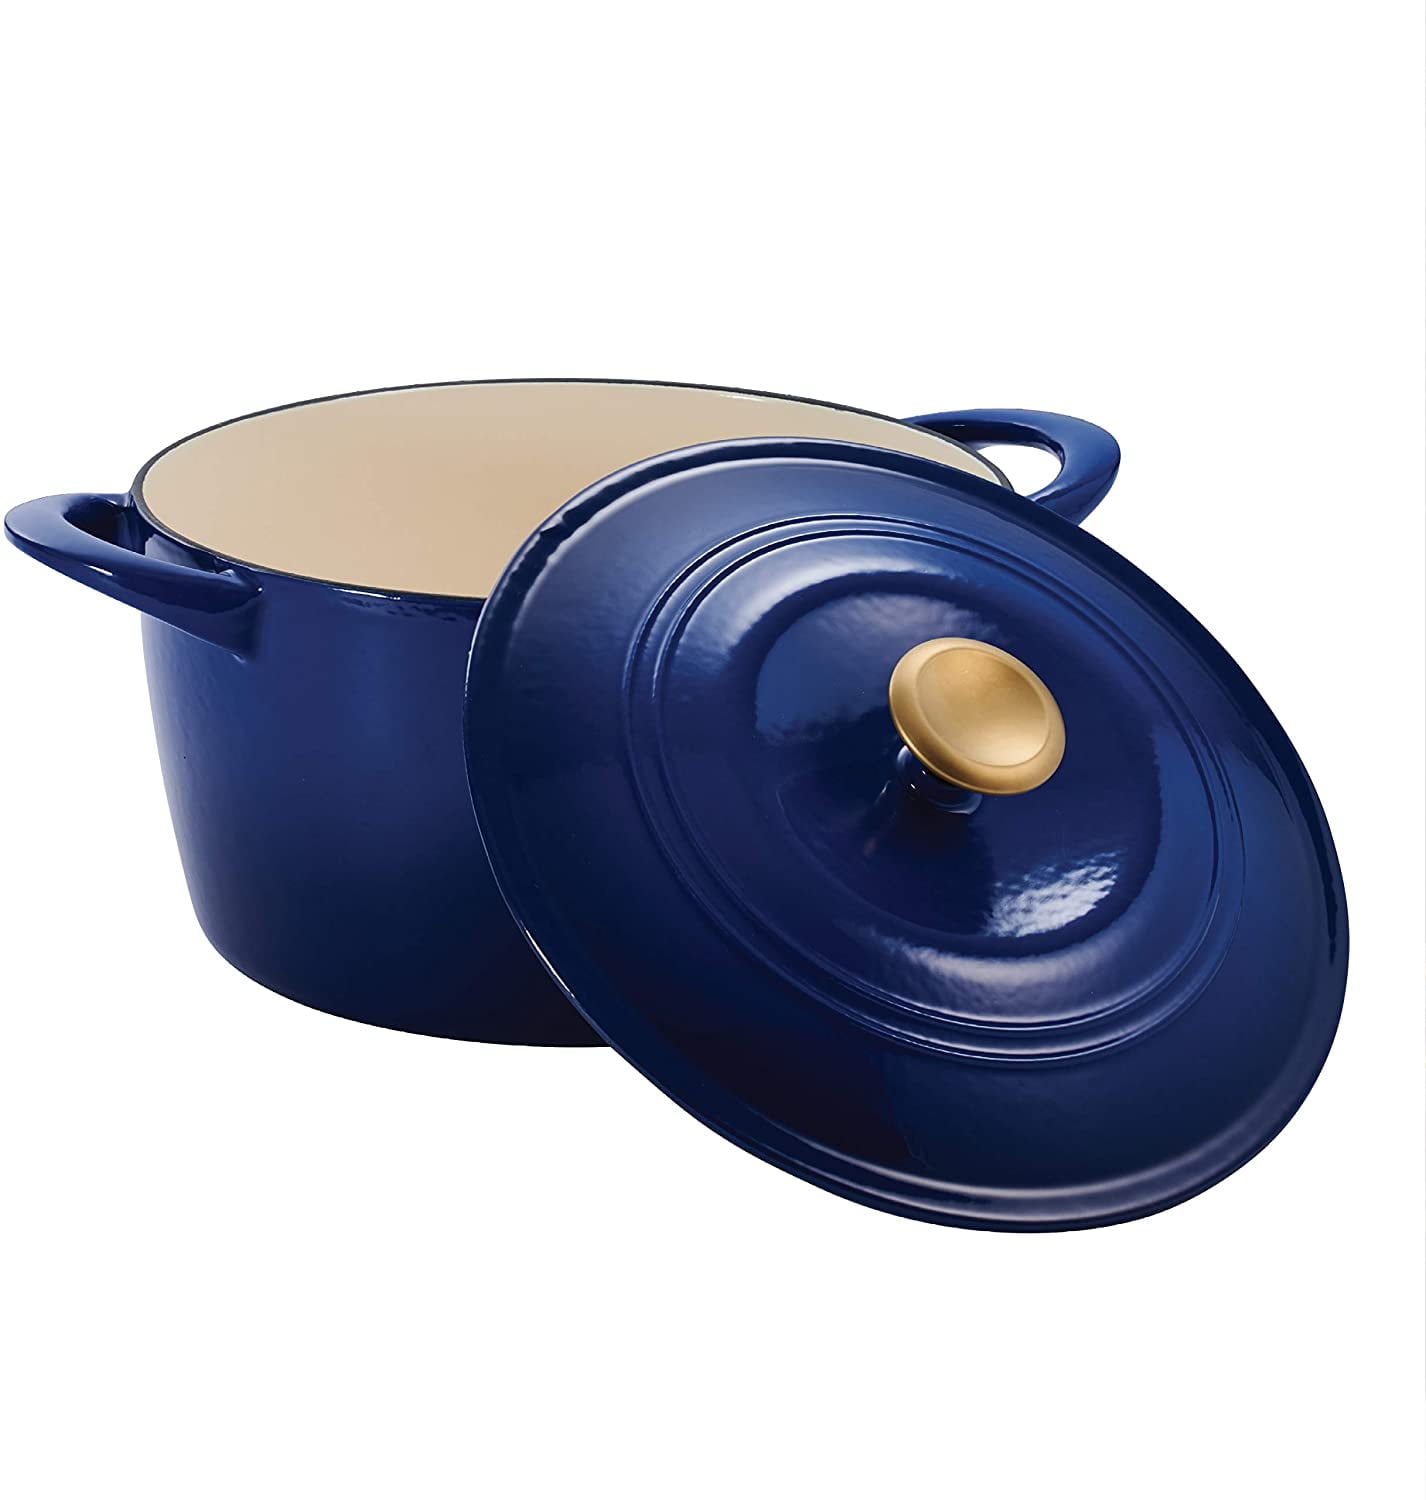 5.5 Qt Enameled Cast Iron Round Dutch Oven - Matte Black with Gold  Stainless Steel Knob - Tramontina US